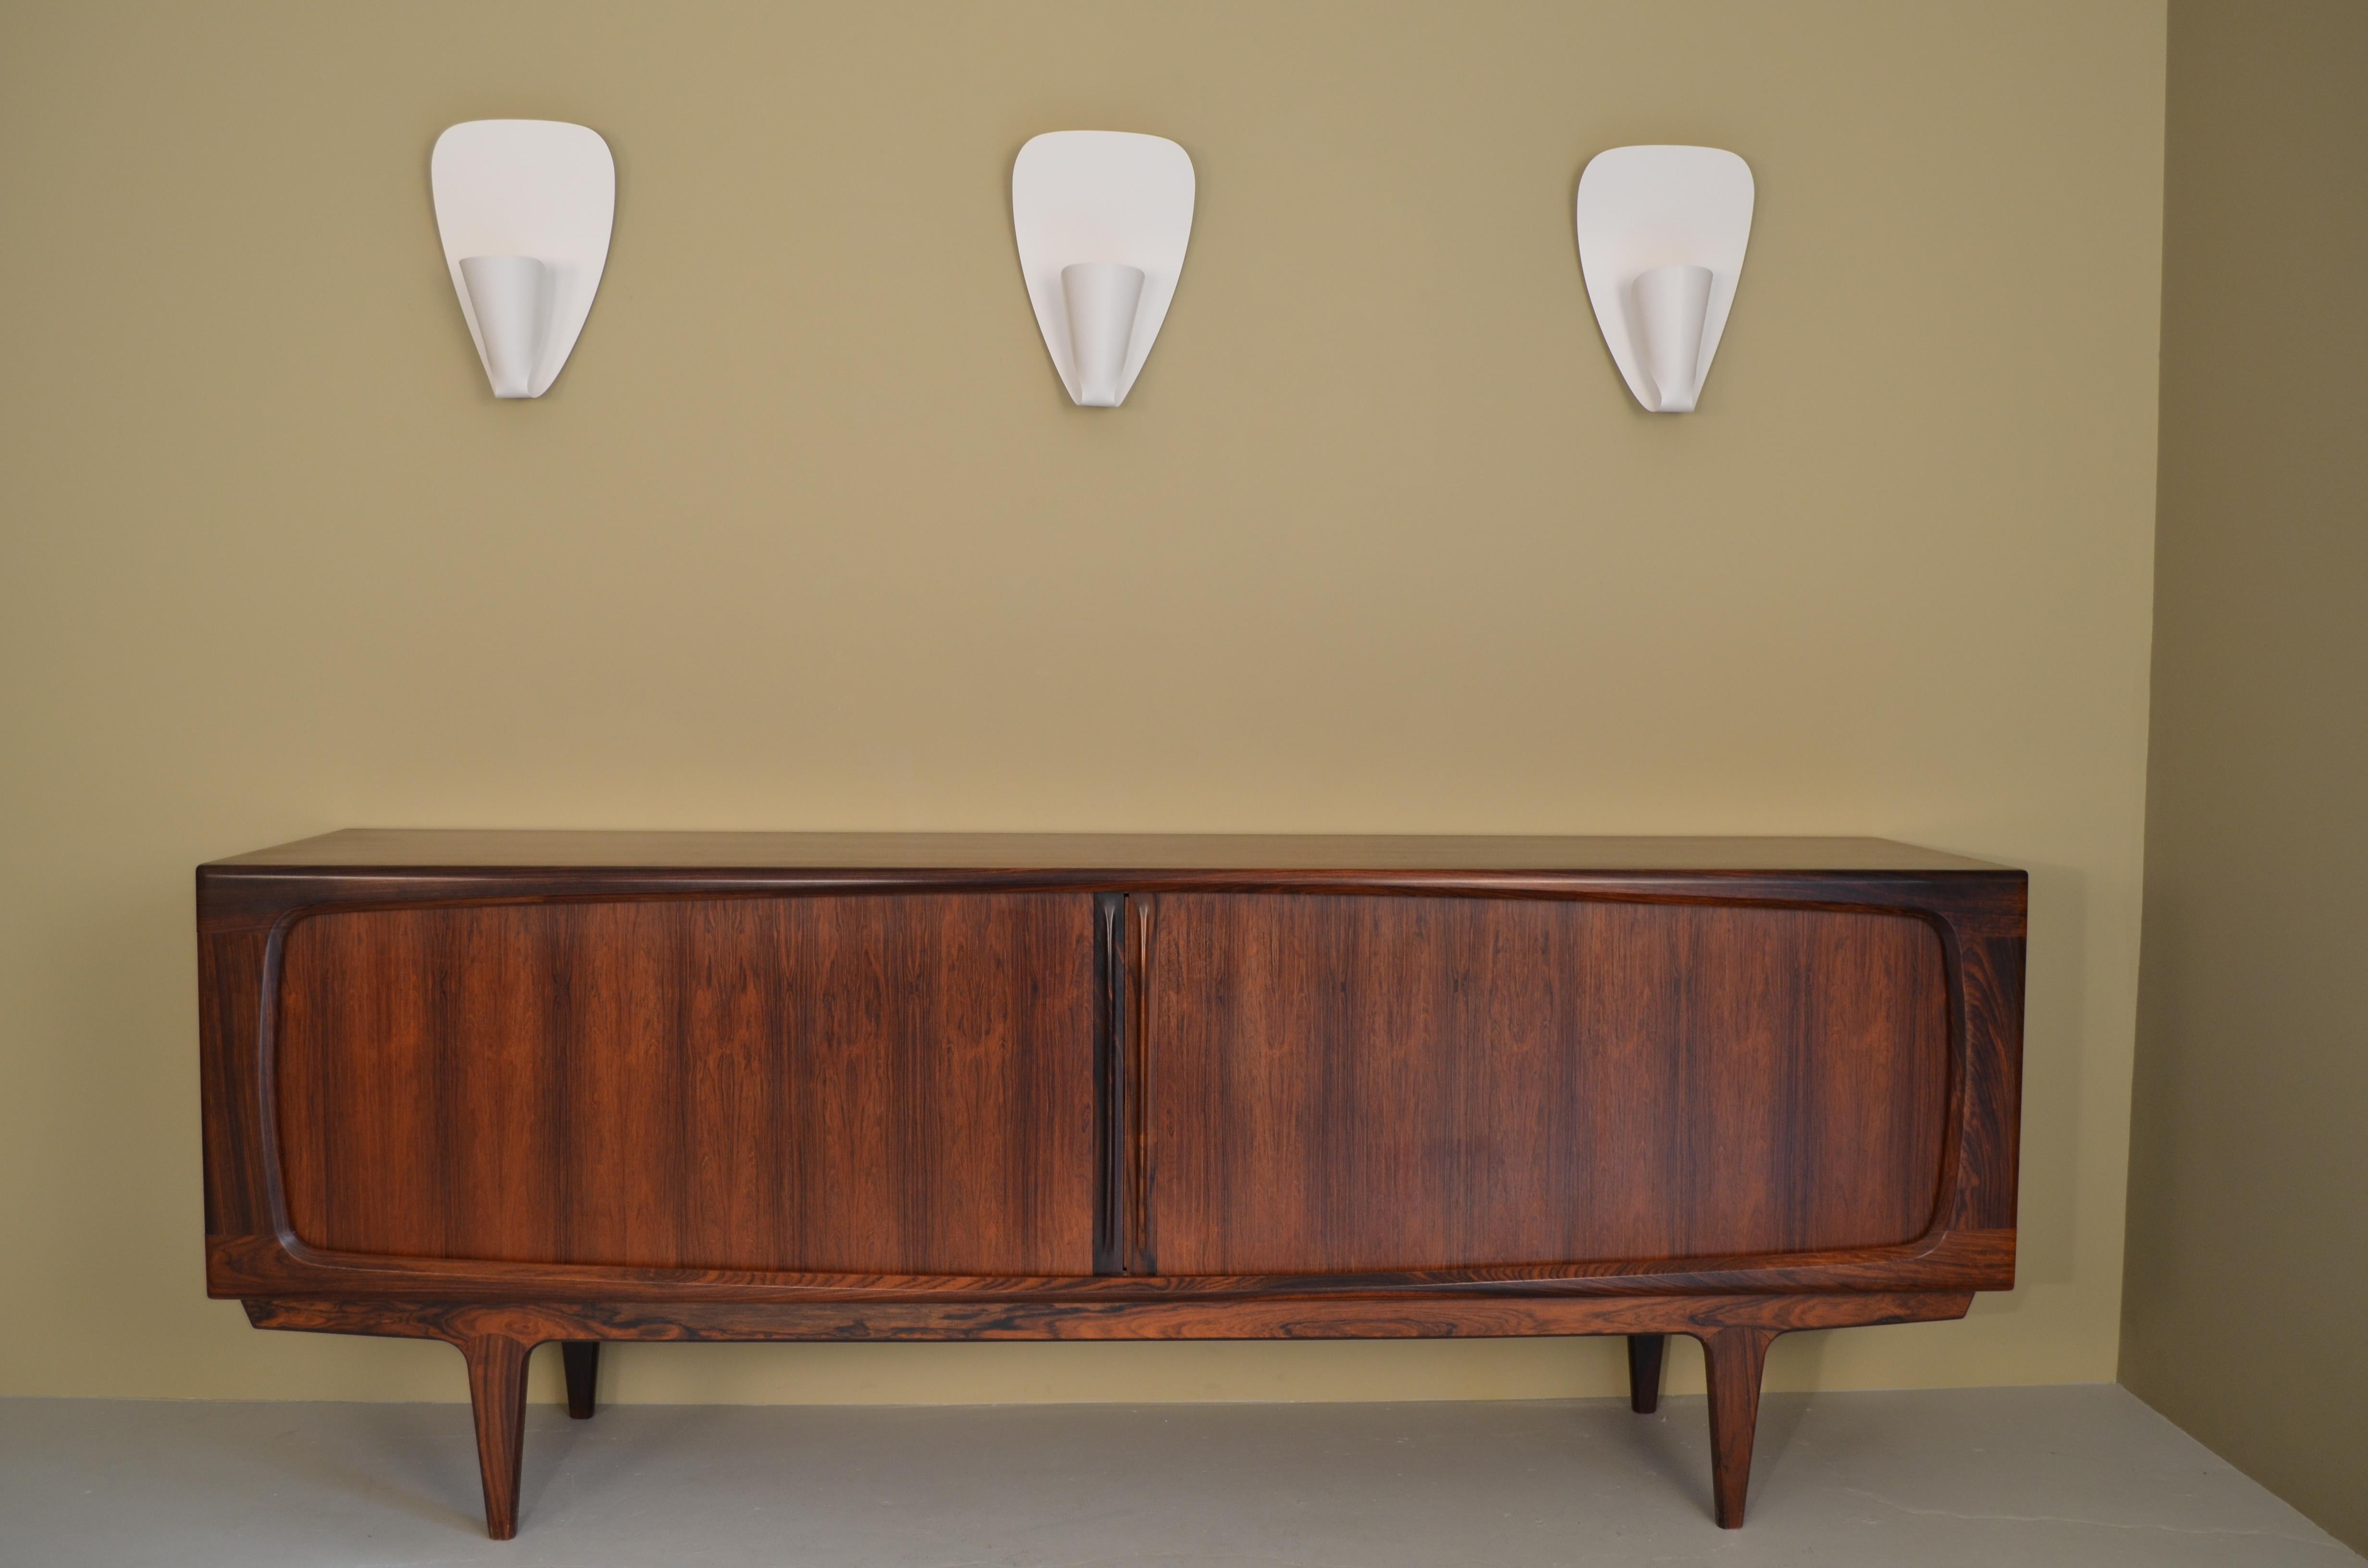 Painted Pair of White Sconces B206 by Michel Buffet - in Stock!